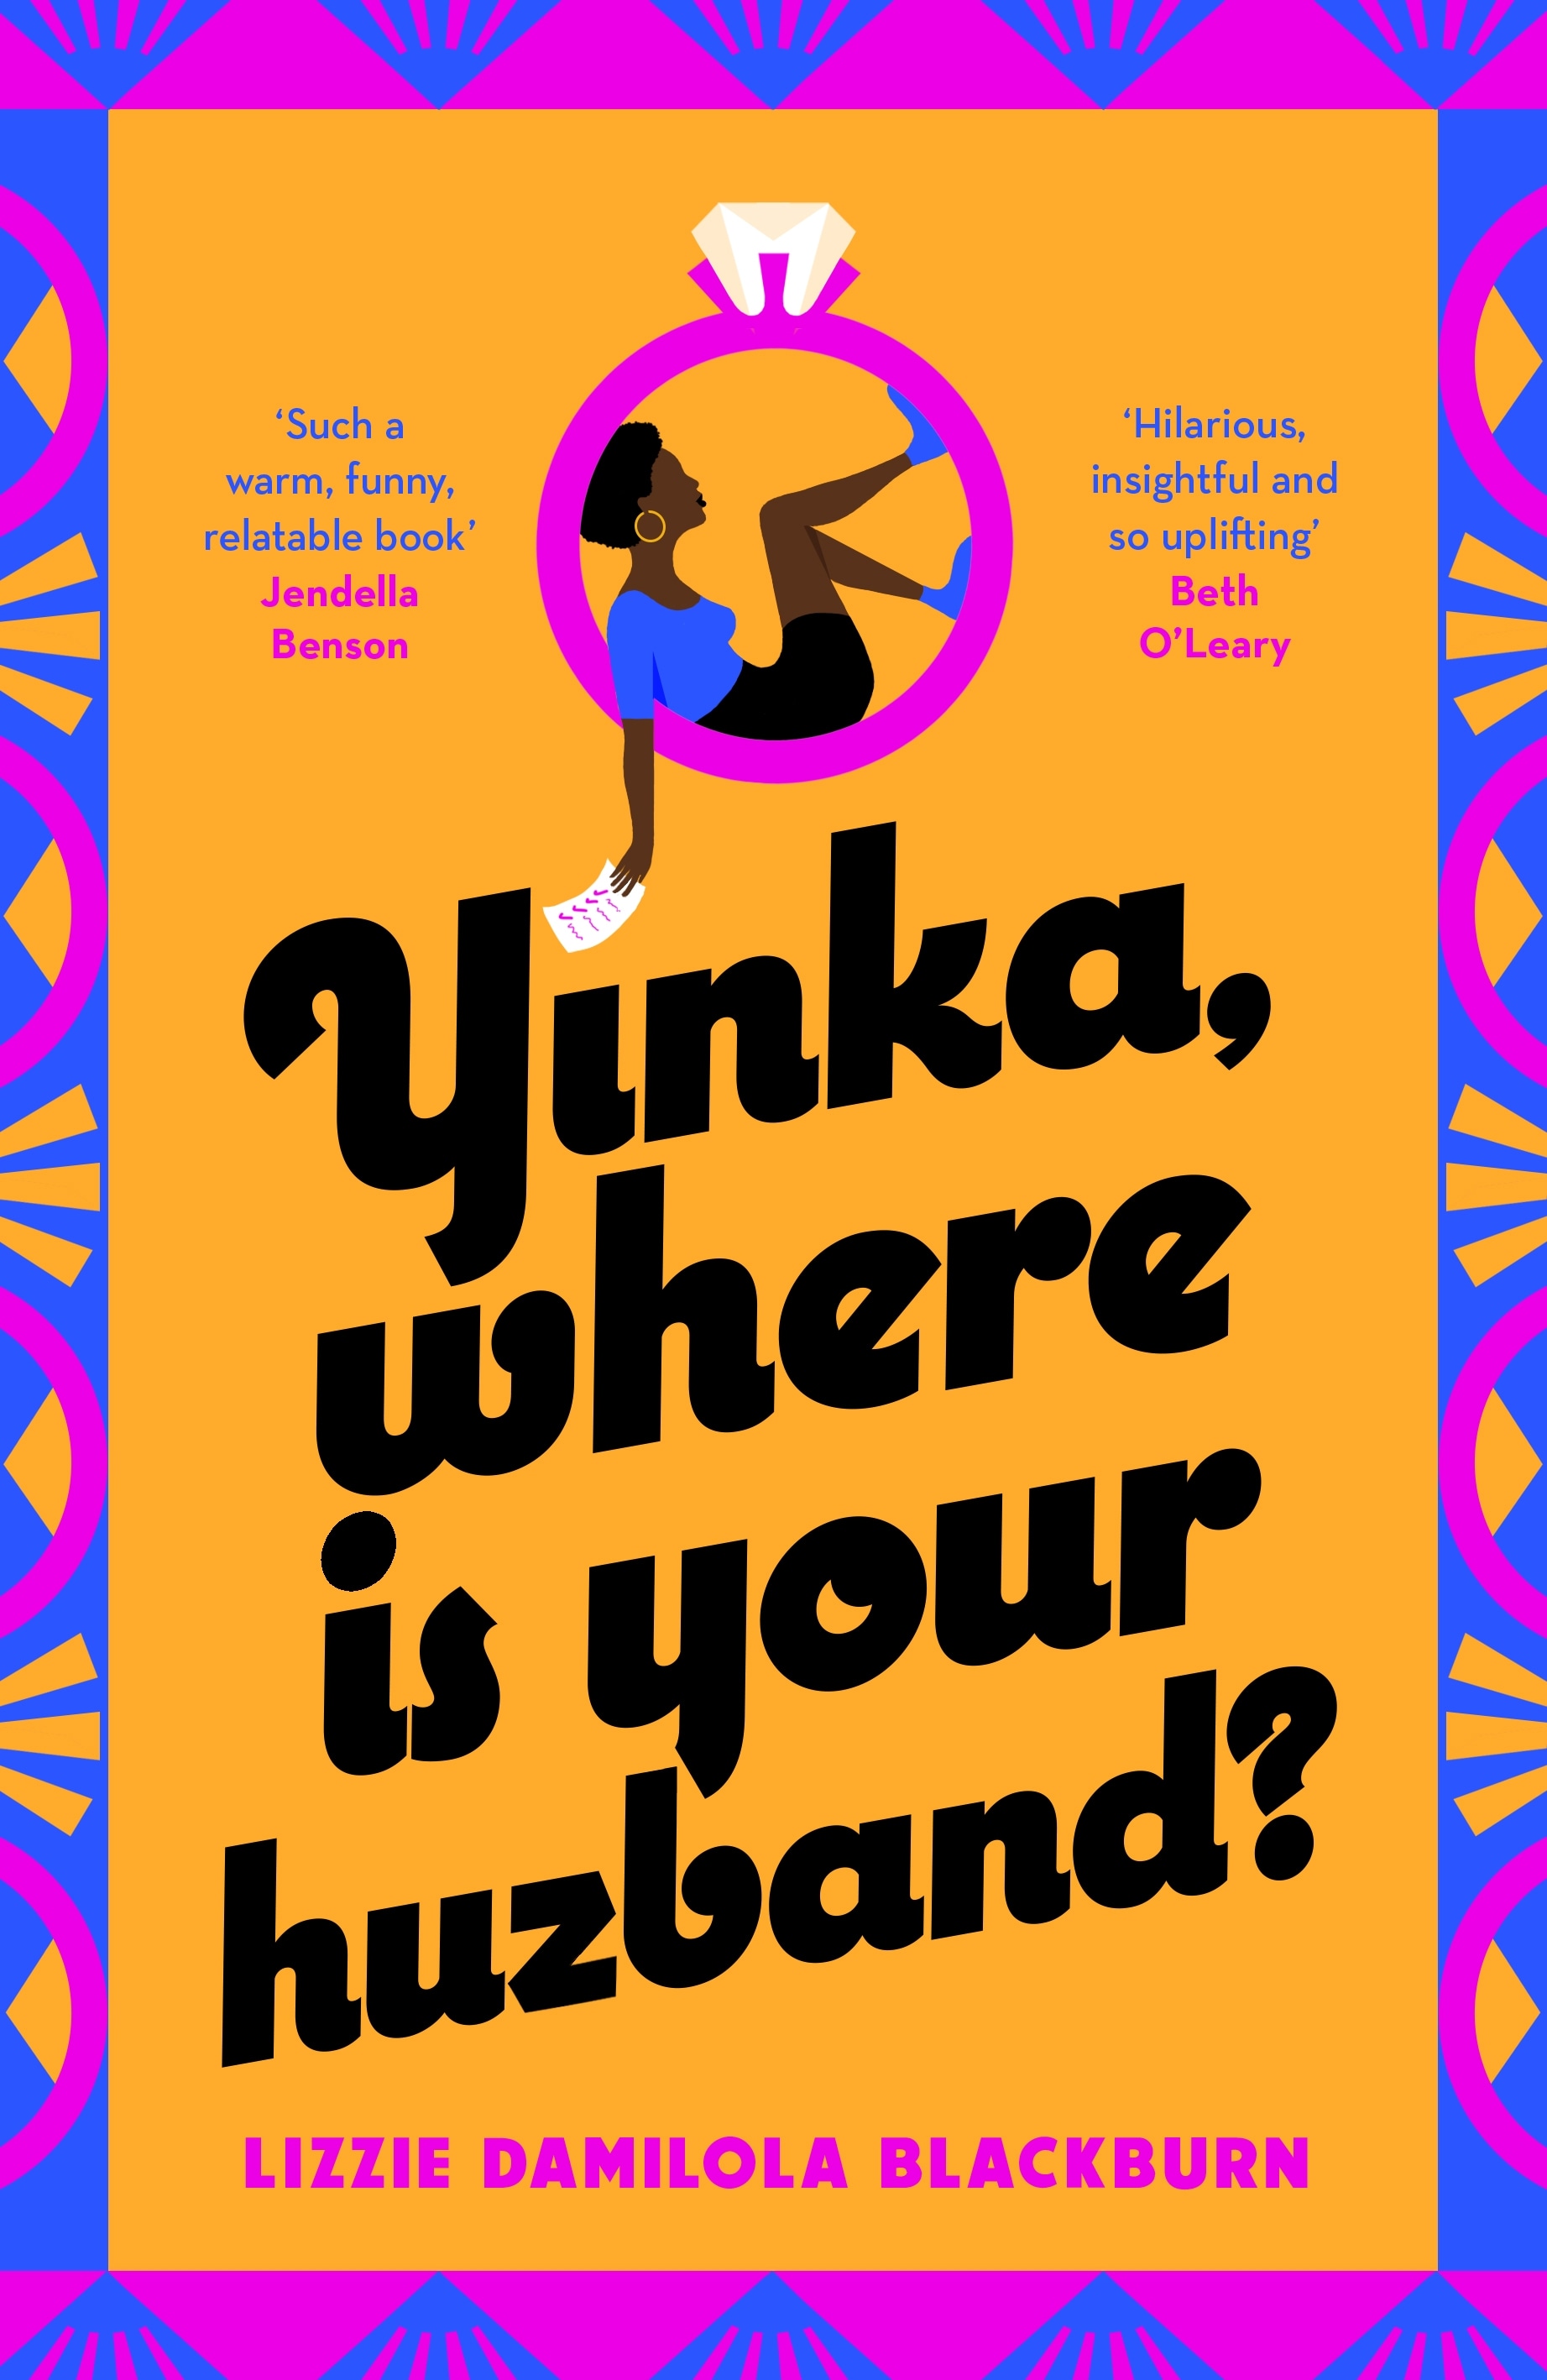 Book “Yinka, Where is Your Huzband?” by Lizzie Damilola Blackburn — March 31, 2022